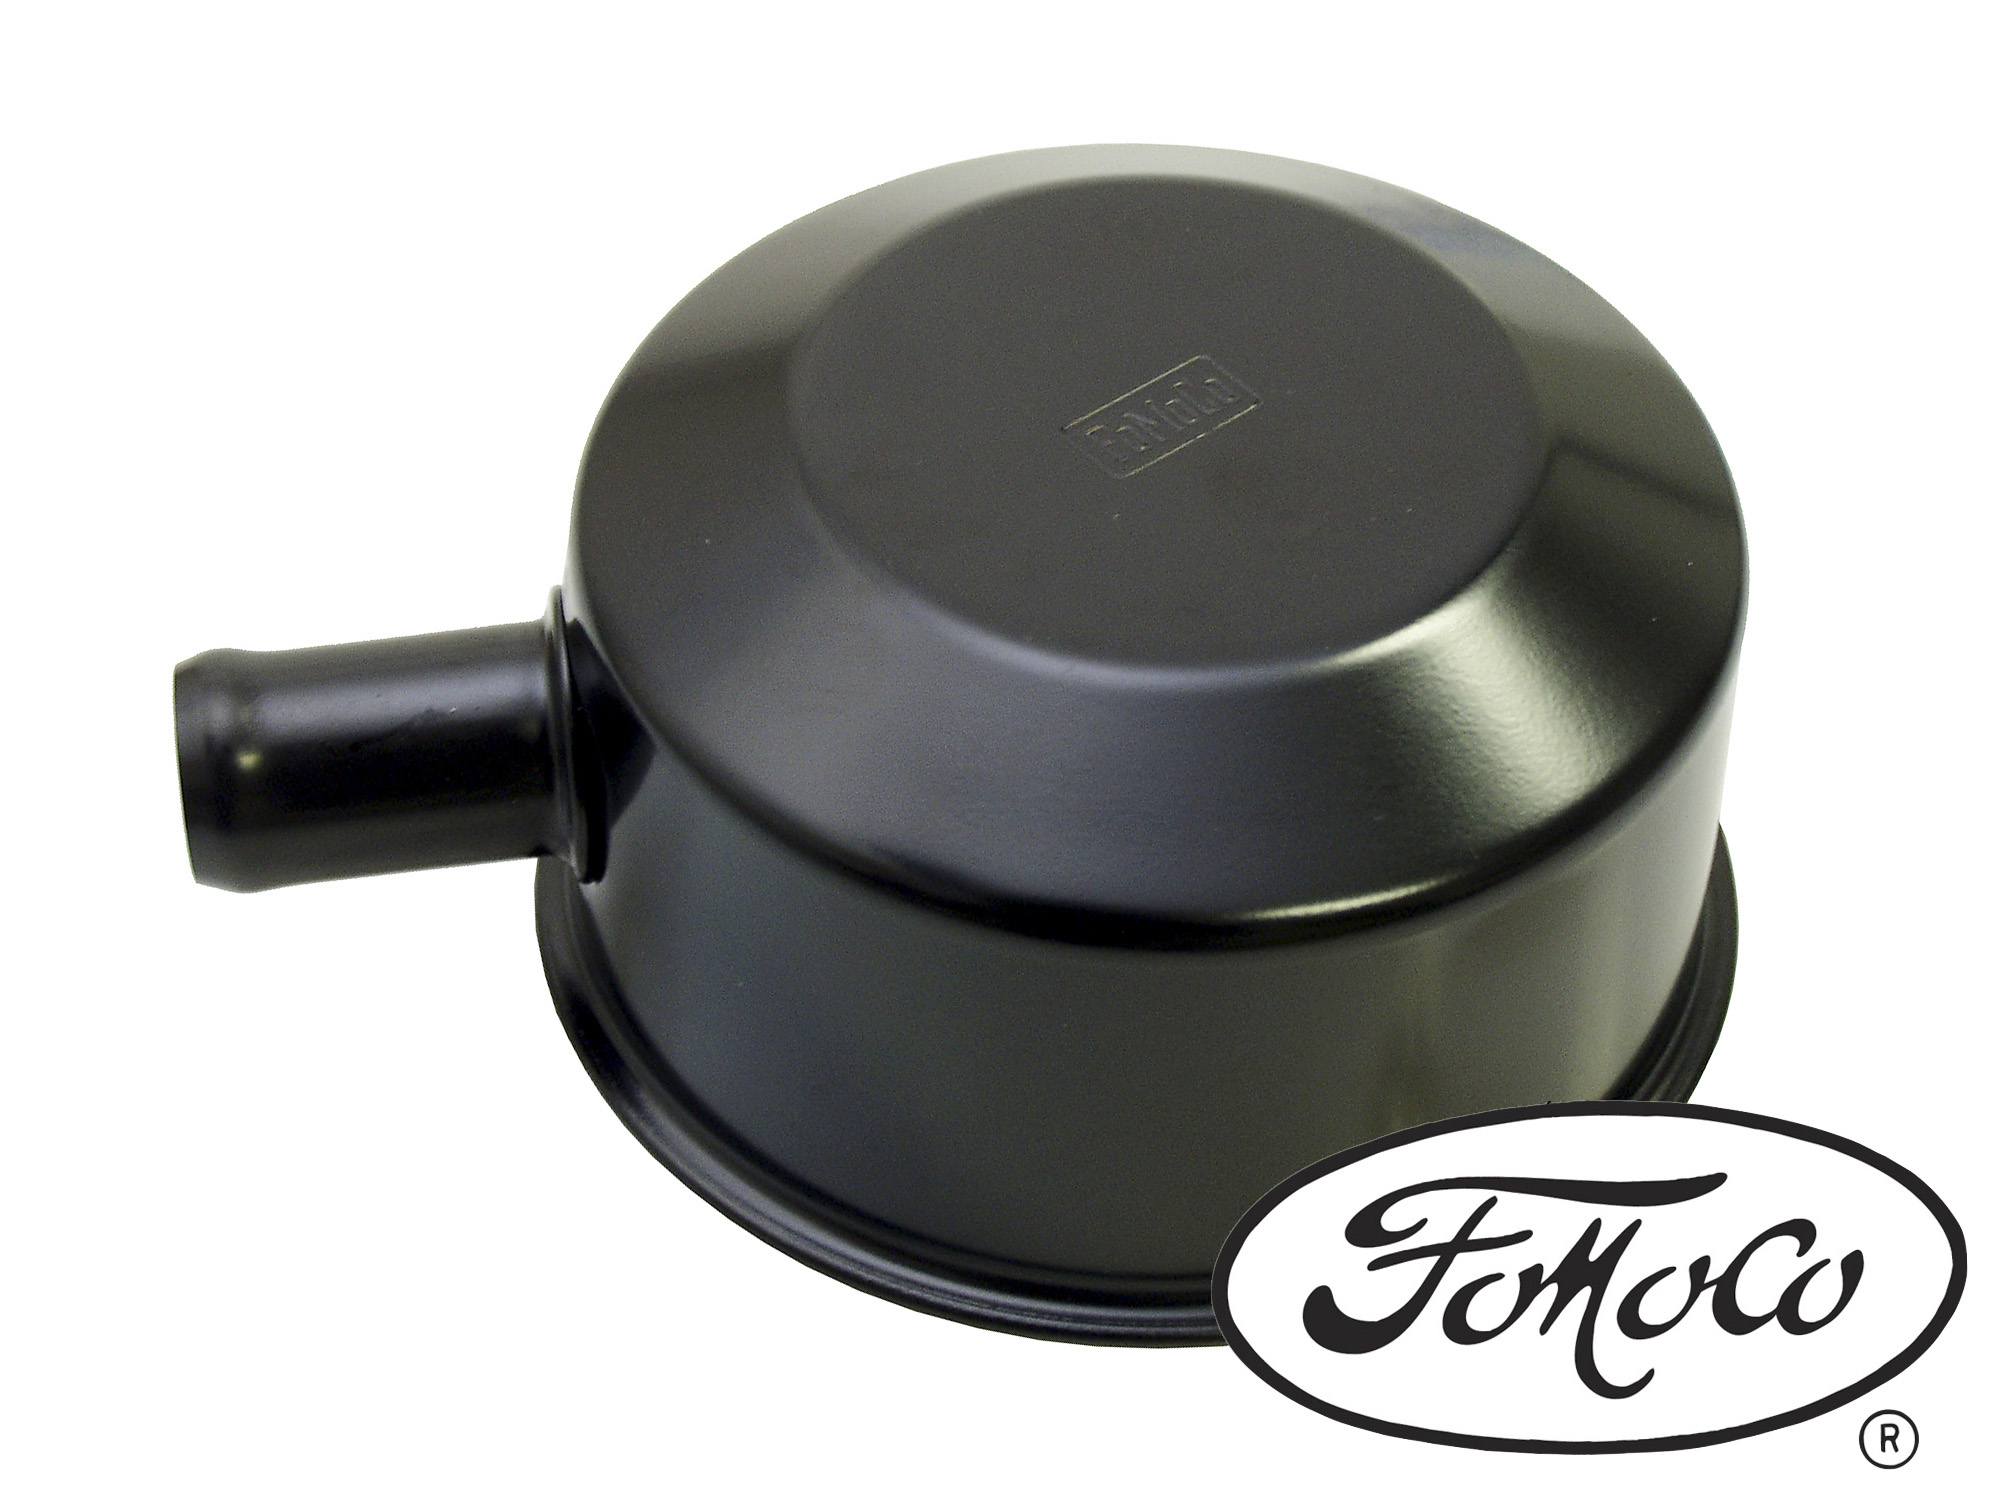 CLOSED OIL BREATHER CAP WITH TUBE AND FOMOCO LOGO - BLACK